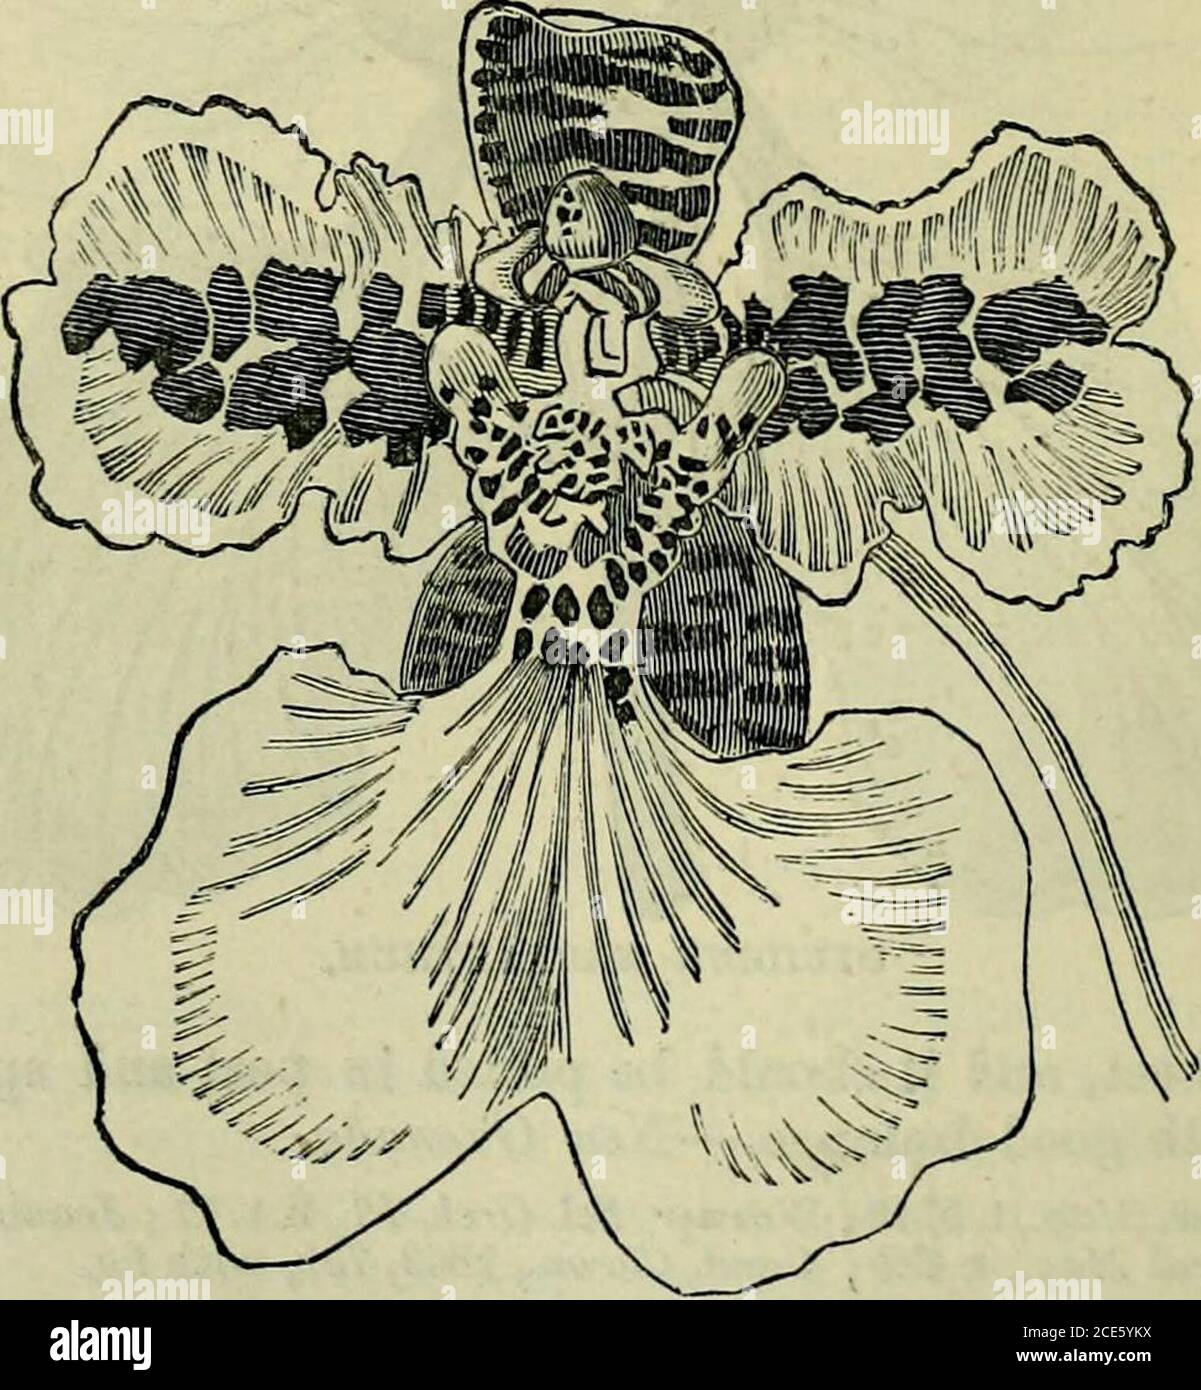 . The orchid-grower's manual : containing descriptions of the best species and varieties of orchidaceous plants . Lindley.—A neat and pleasing species, withovate compressed angulate pseudobulbs, bearing two broadlyligulate leaves at the top, and having others springing fromthe base, out of whose axils the scape arises. The flowersare in racemes, and consist of obovate-lanceolate acuminateyellowish green sepals and petals marked with purple blotches,and an oblong-ovate apiculate lip, which has a stout tooth oneach side about the middle, and is of a pale sulphur yellow,whitish at the base, where Stock Photo